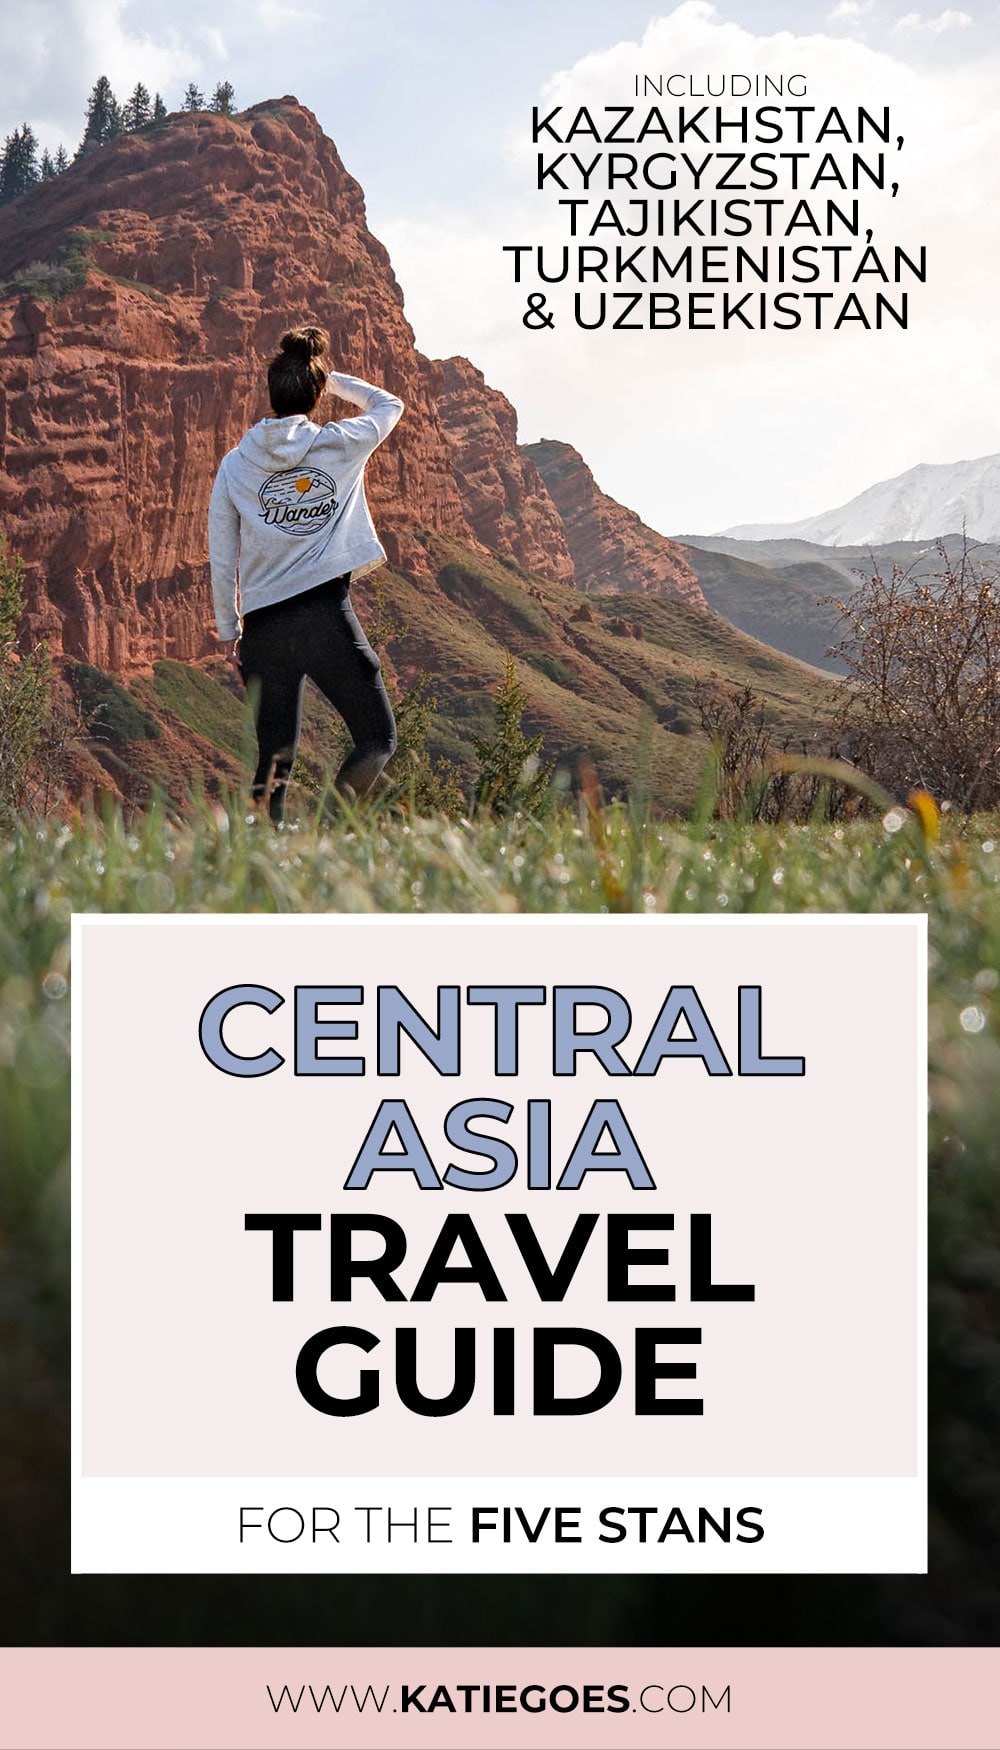 Visiting the Stan Countries: Central Asia Travel Guide